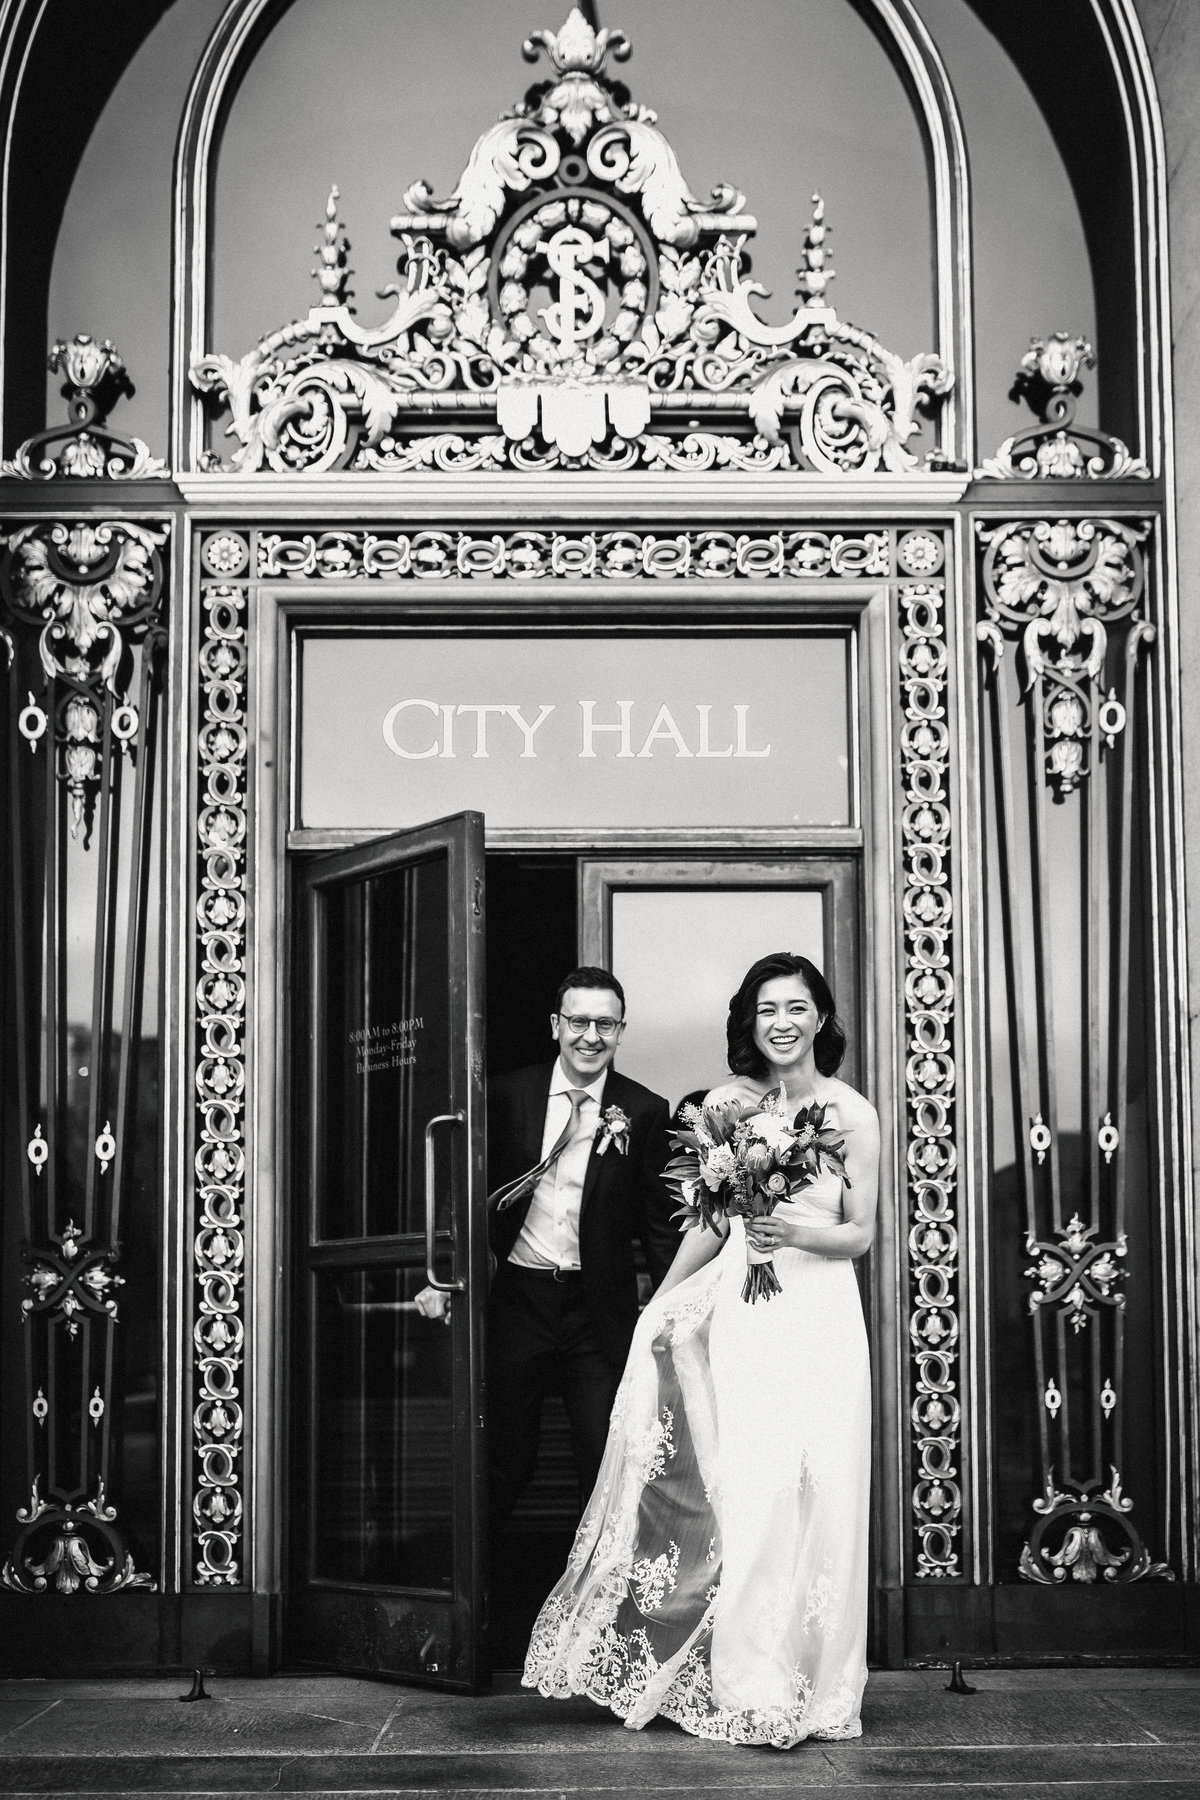 Wedding couple exits building together after their San Francisco City Hall elopement